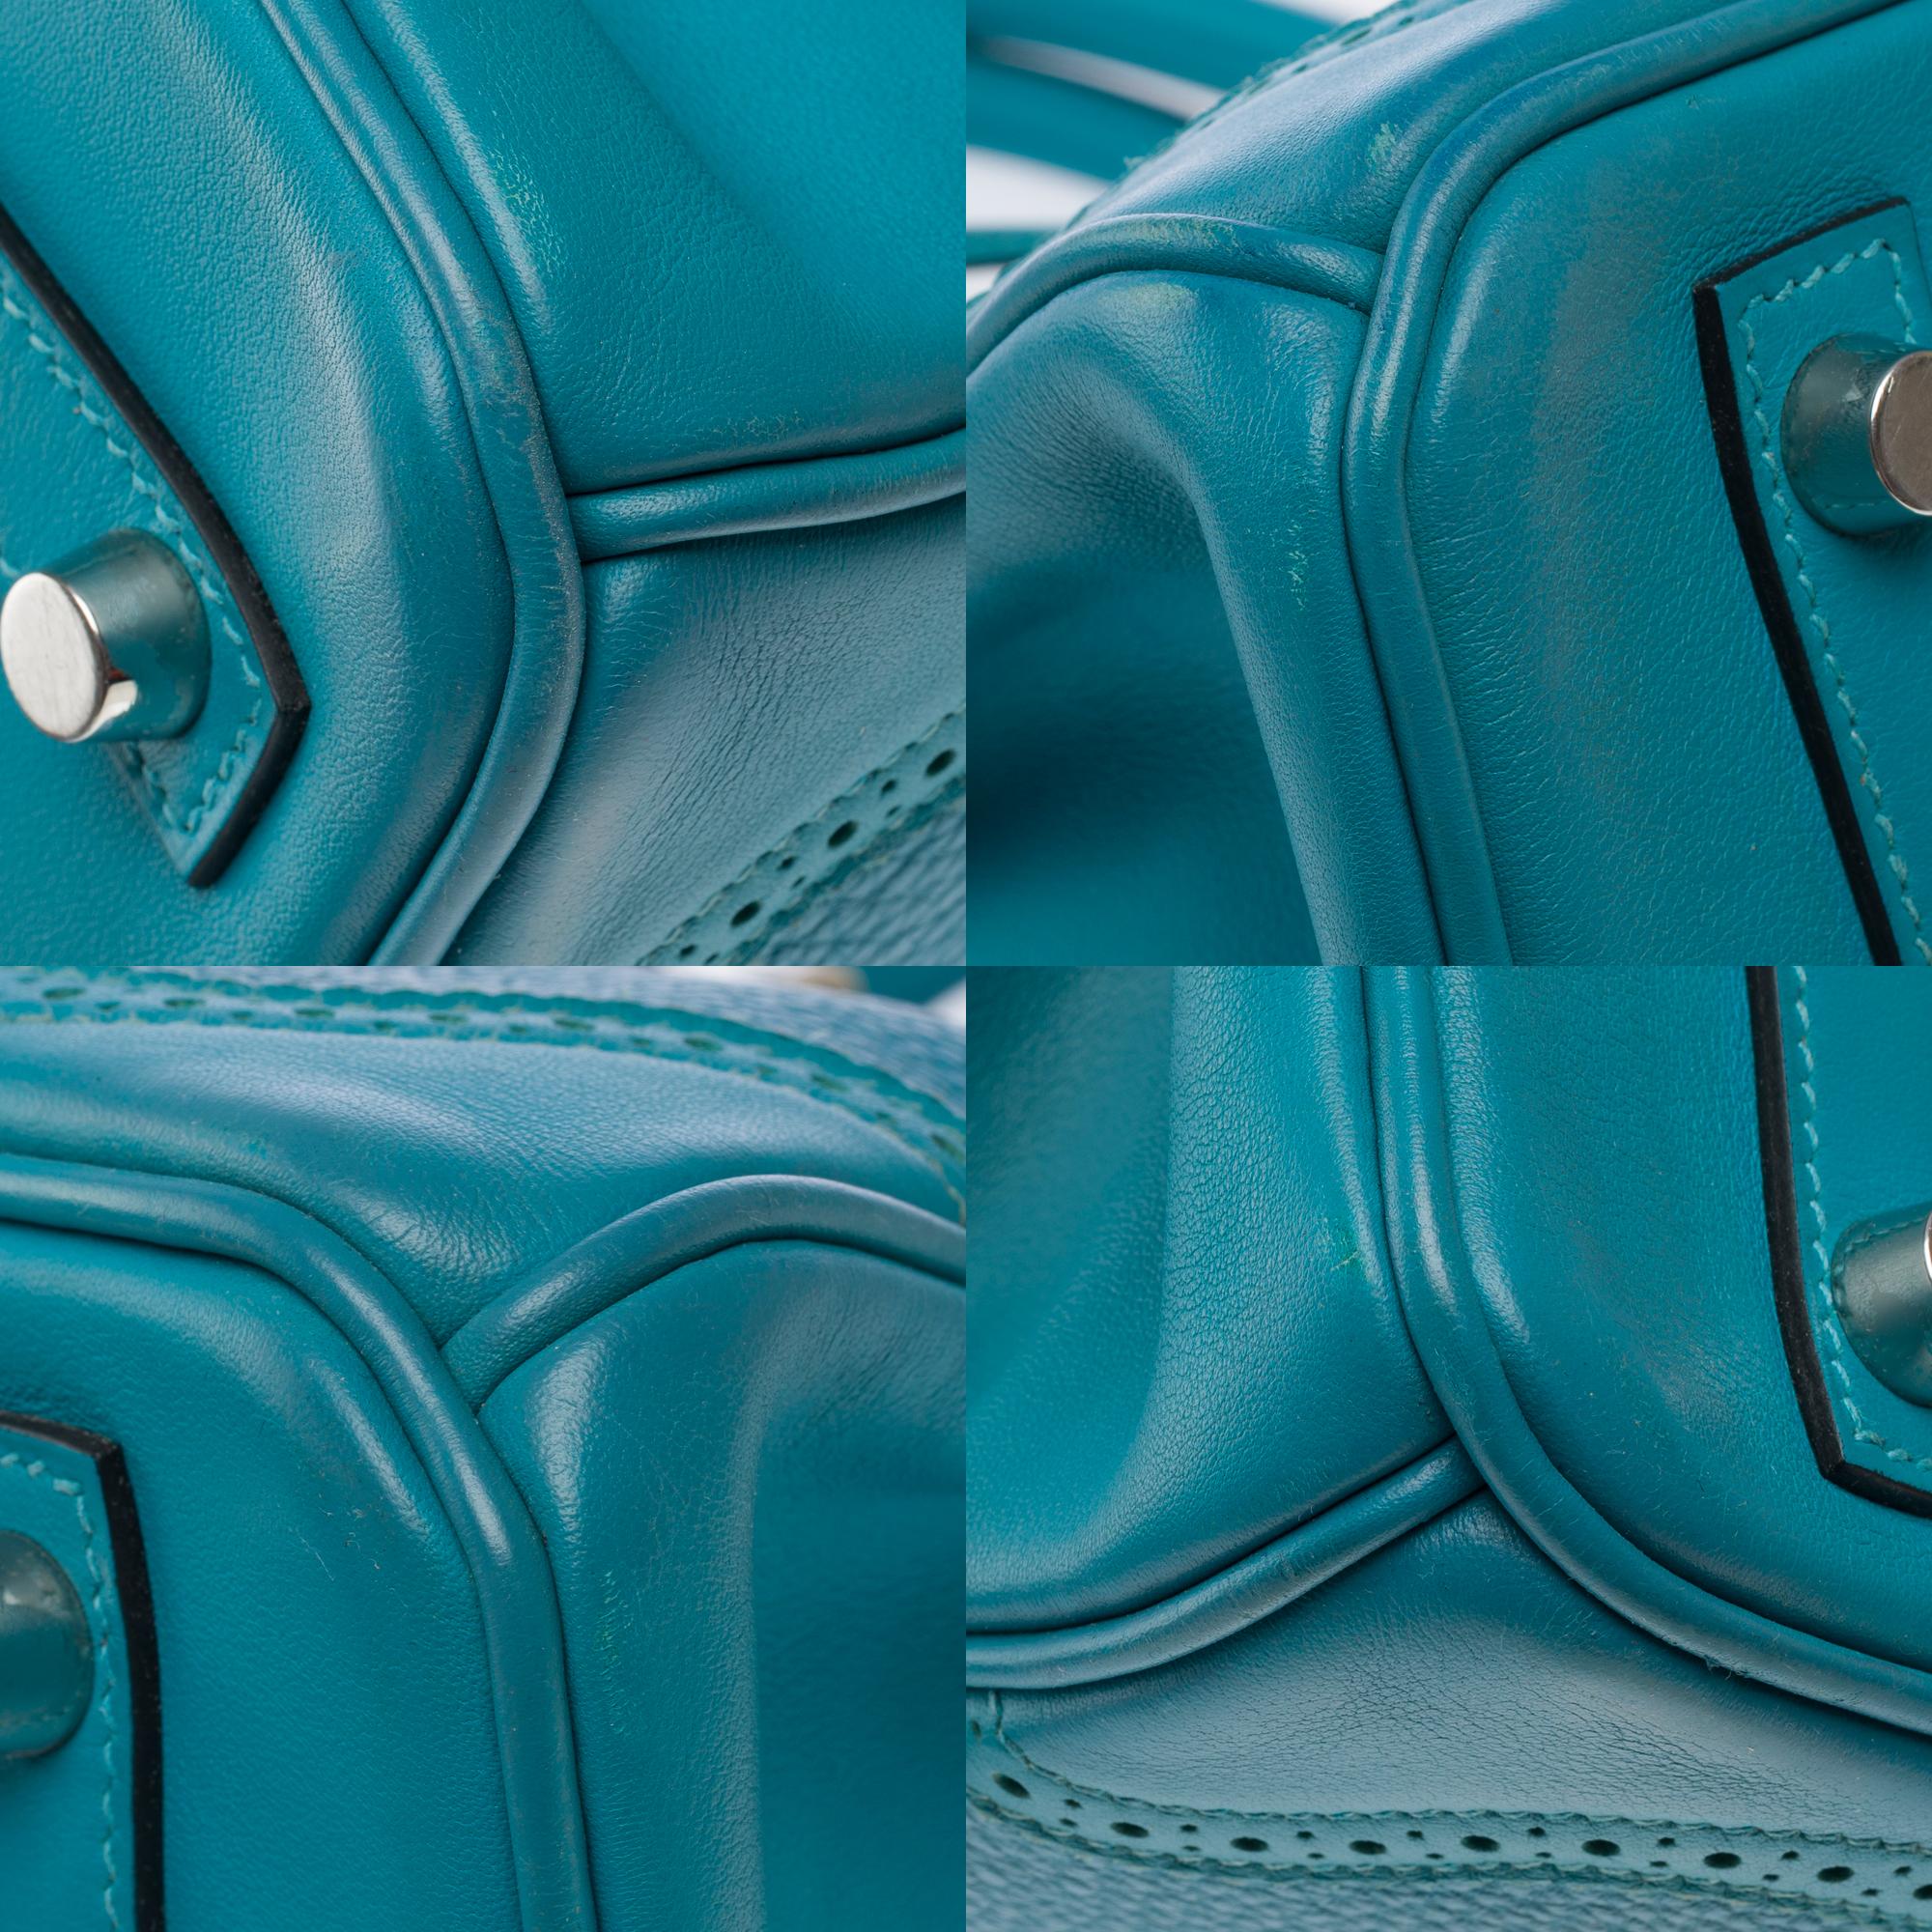 Ghillies Limited Edition Hermes Birkin 30 handbag in Turquoise Blue leather, SHW For Sale 9